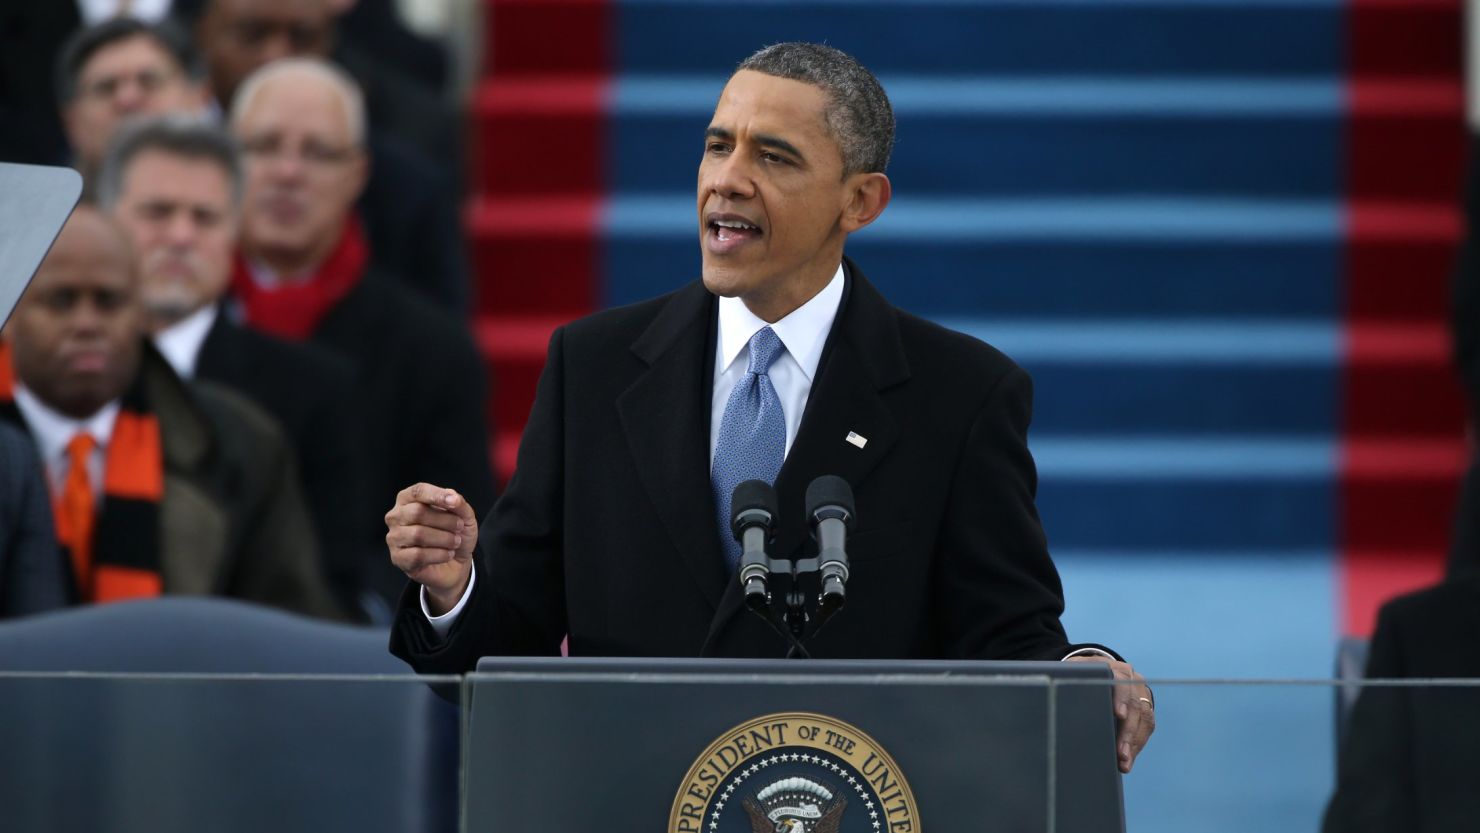 Many in GOP have slammed Obama's inauguration speech as liberal. Maria Cardona says his views align with most Americans